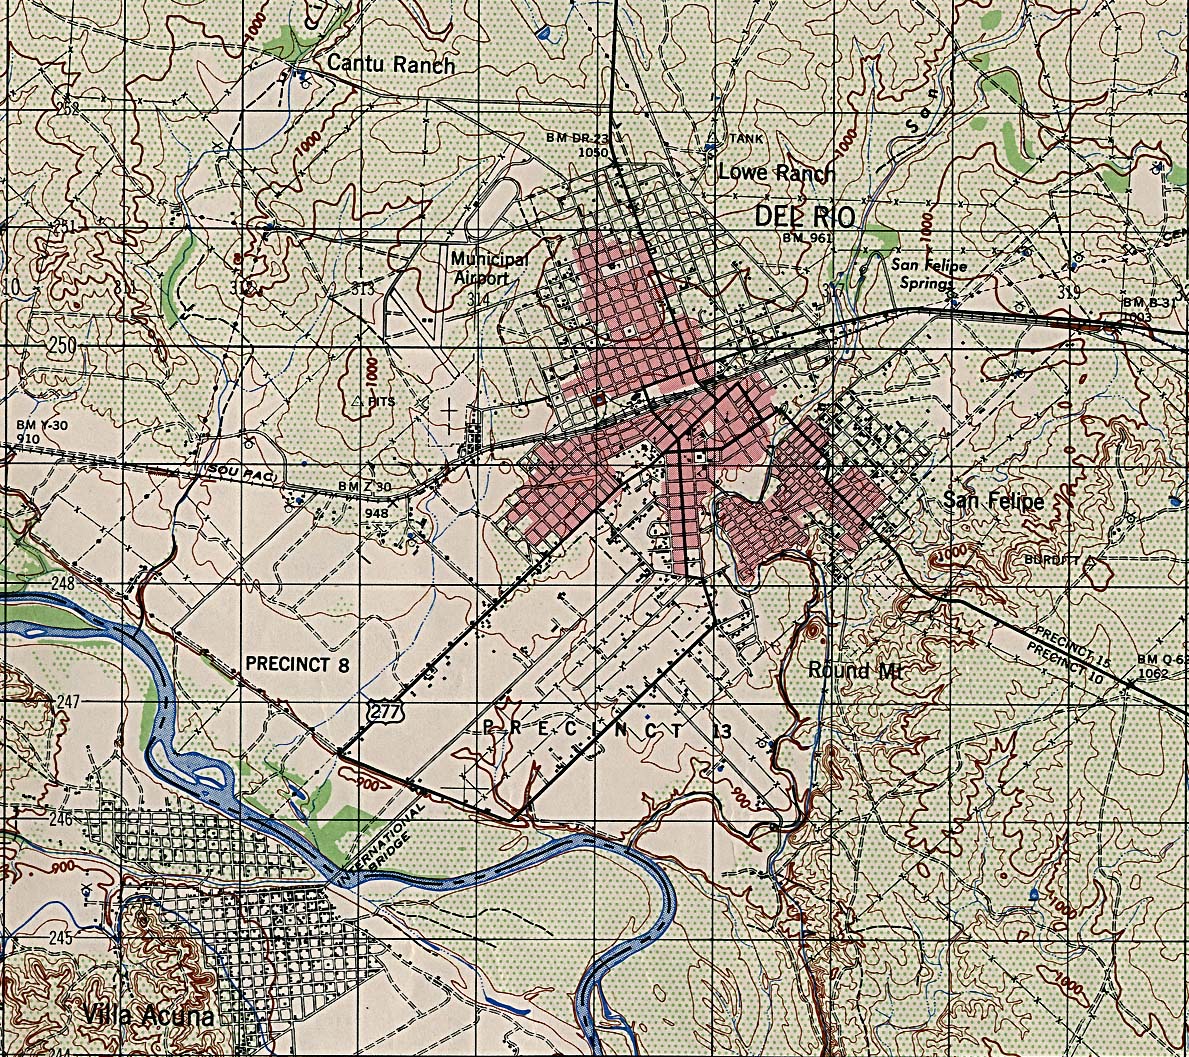 1 Maps ... 1:50,000 A.M.S. 1947 (663K) (University of Texas Electronic Map Collection) ...